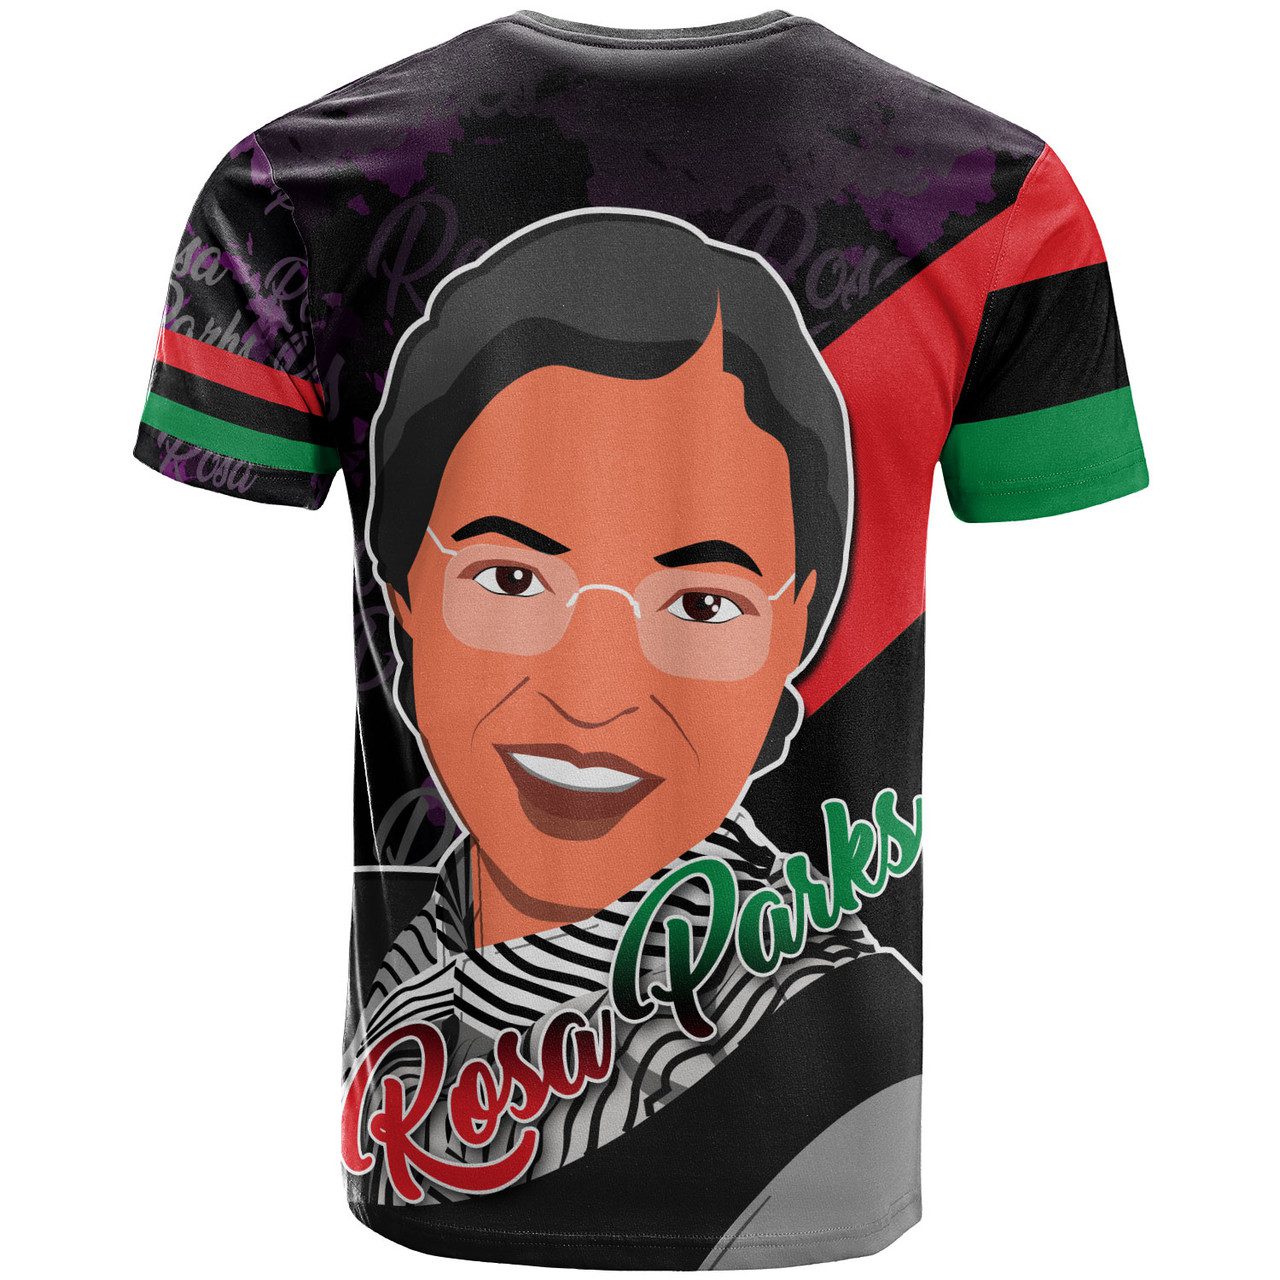 Black History Month T-Shirt – Rosa Parks Civil Rights Leader With Pan Africa Flag T-Shirt